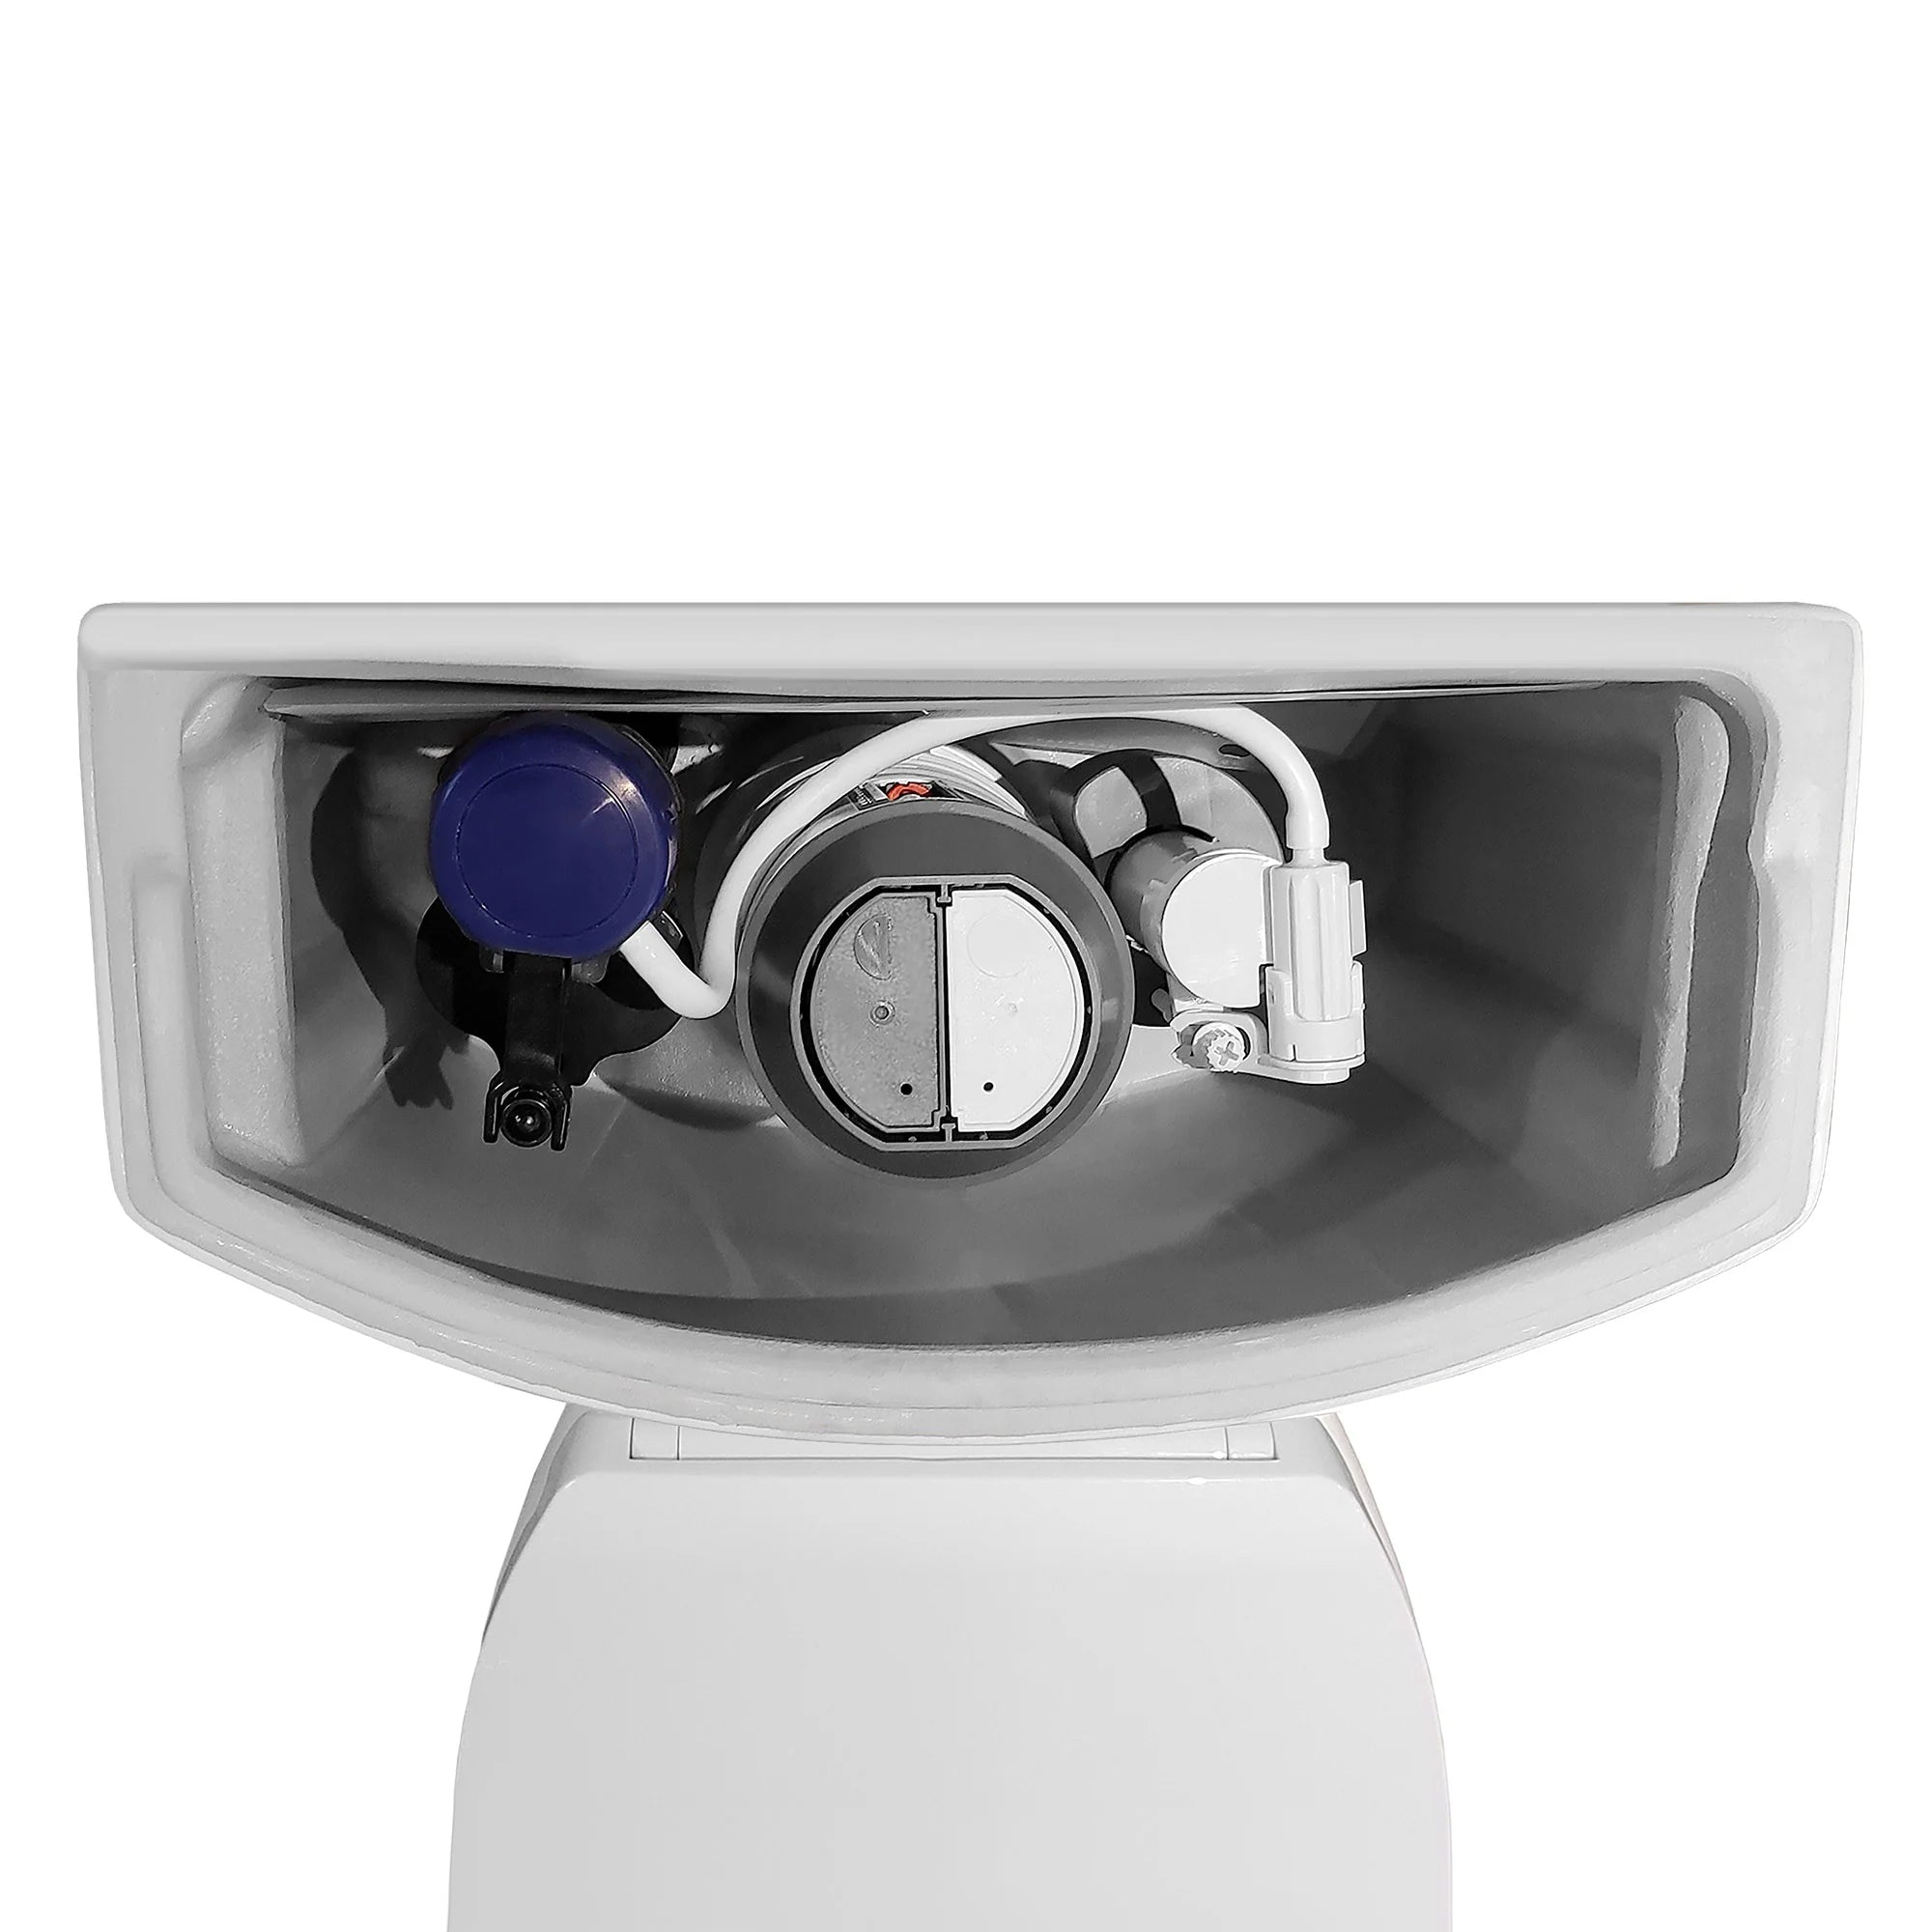 WHITEHAUS Magic Flush Eco-friendly One Piece Toilet With A Siphonic Action Dual Flush System, Elongated Bowl 1.3/0.9 Gpf - Bathroom Design Center